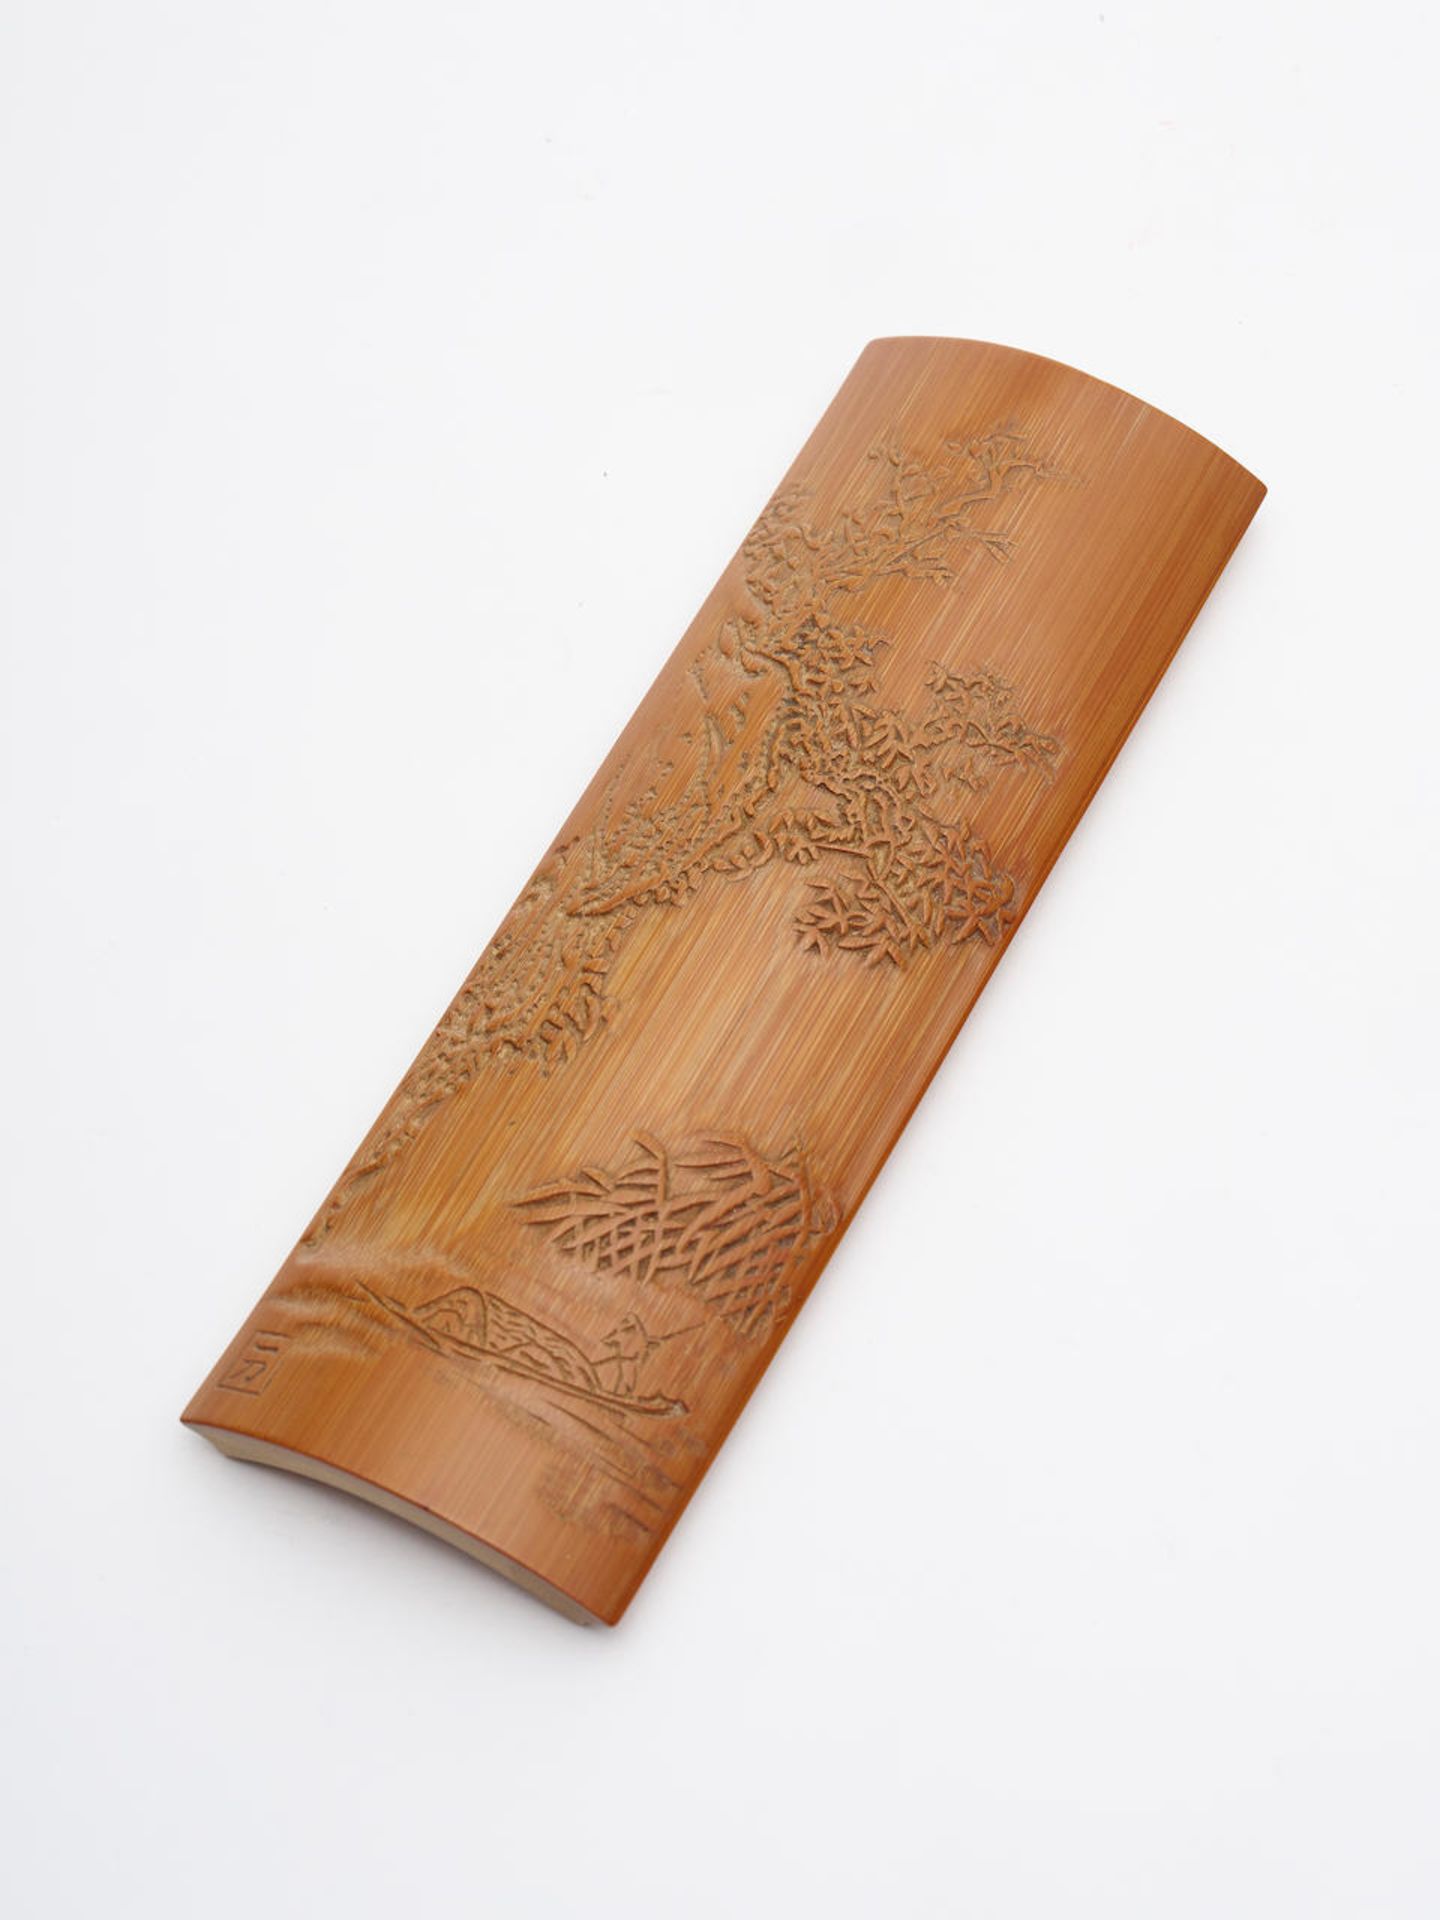 A bamboo 'landscape' wrist rest 19th/ 20th century